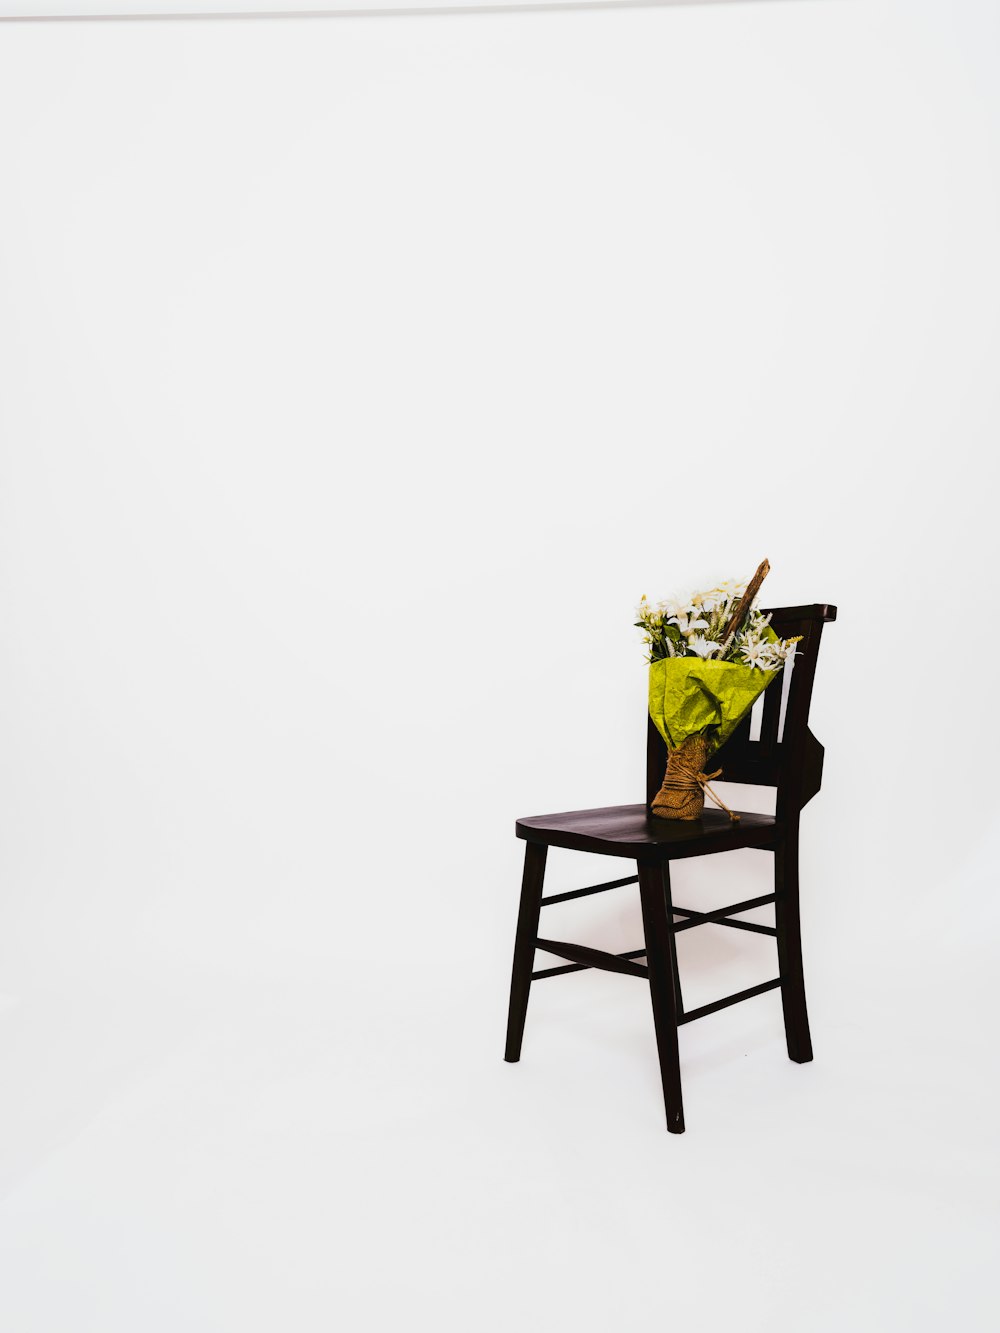 a wooden chair with a vase of flowers on it